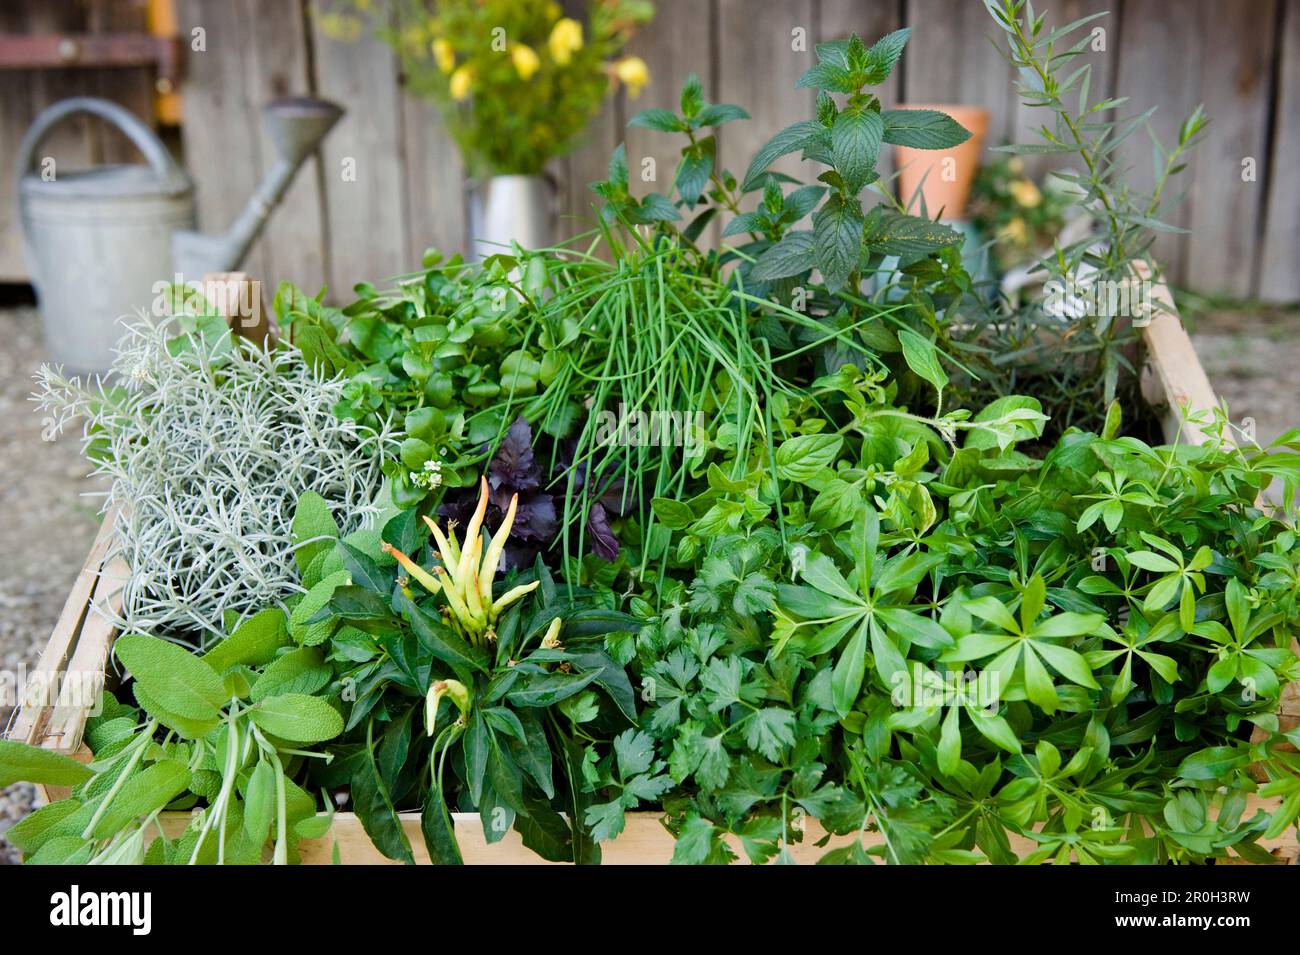 Homegrown herbs and wild herbs, herbage, in a garden, Homegrown, Bavaria, Germany Stock Photo